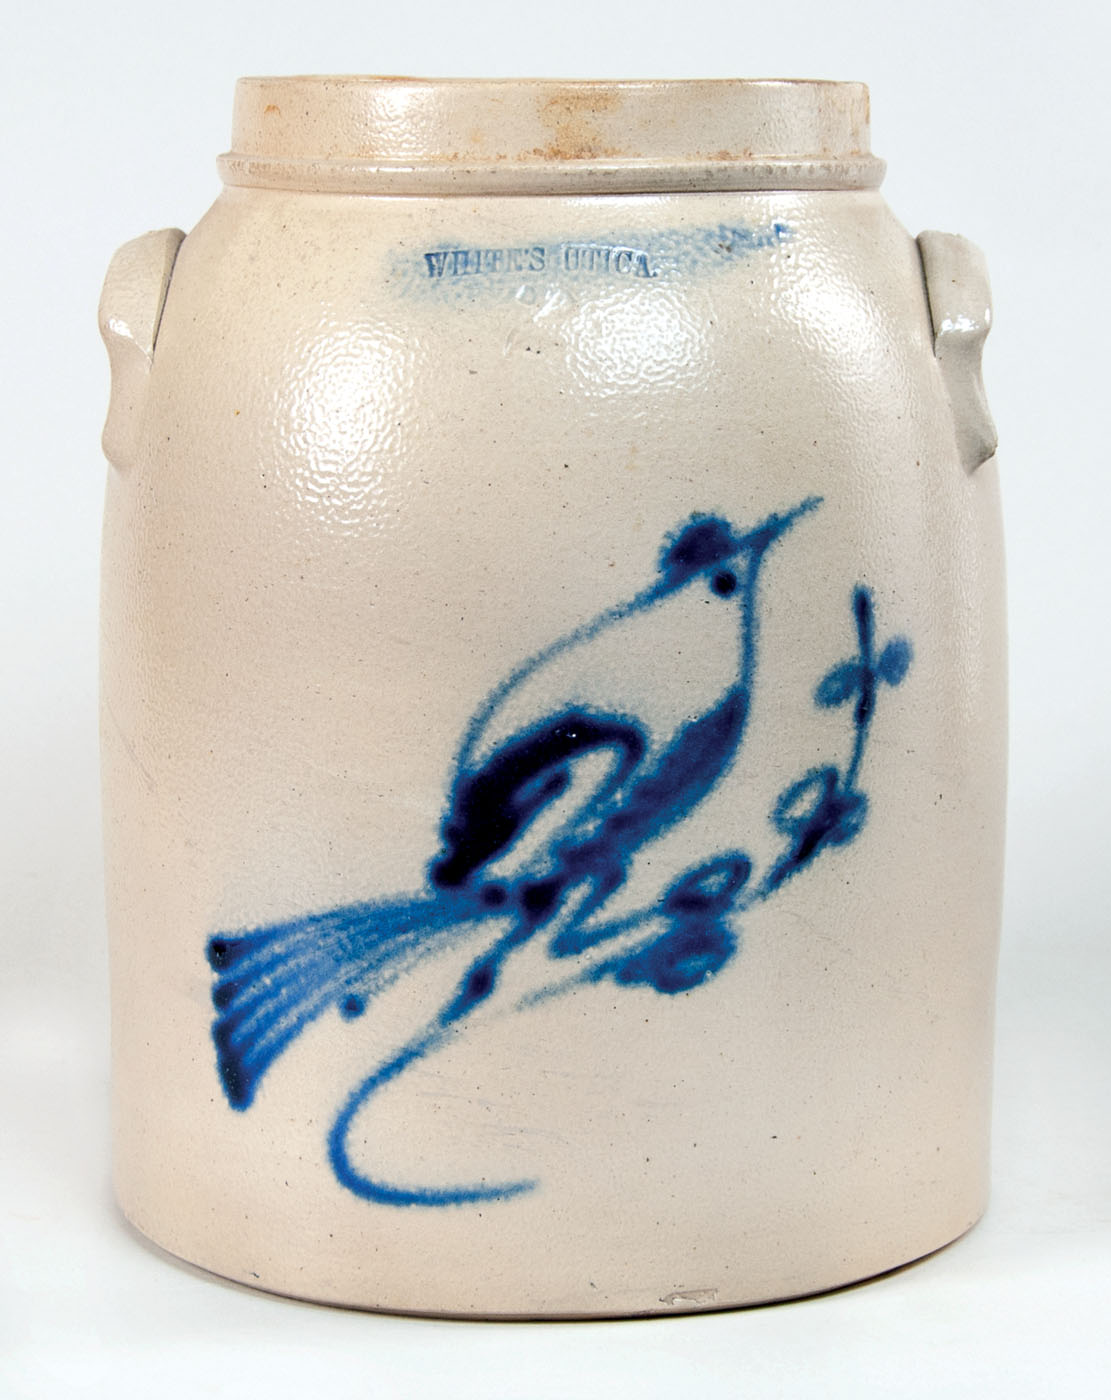 COVERED WATER BUCKET Blue and White Swirl Black Wood Grip Circa 1880 - 1920